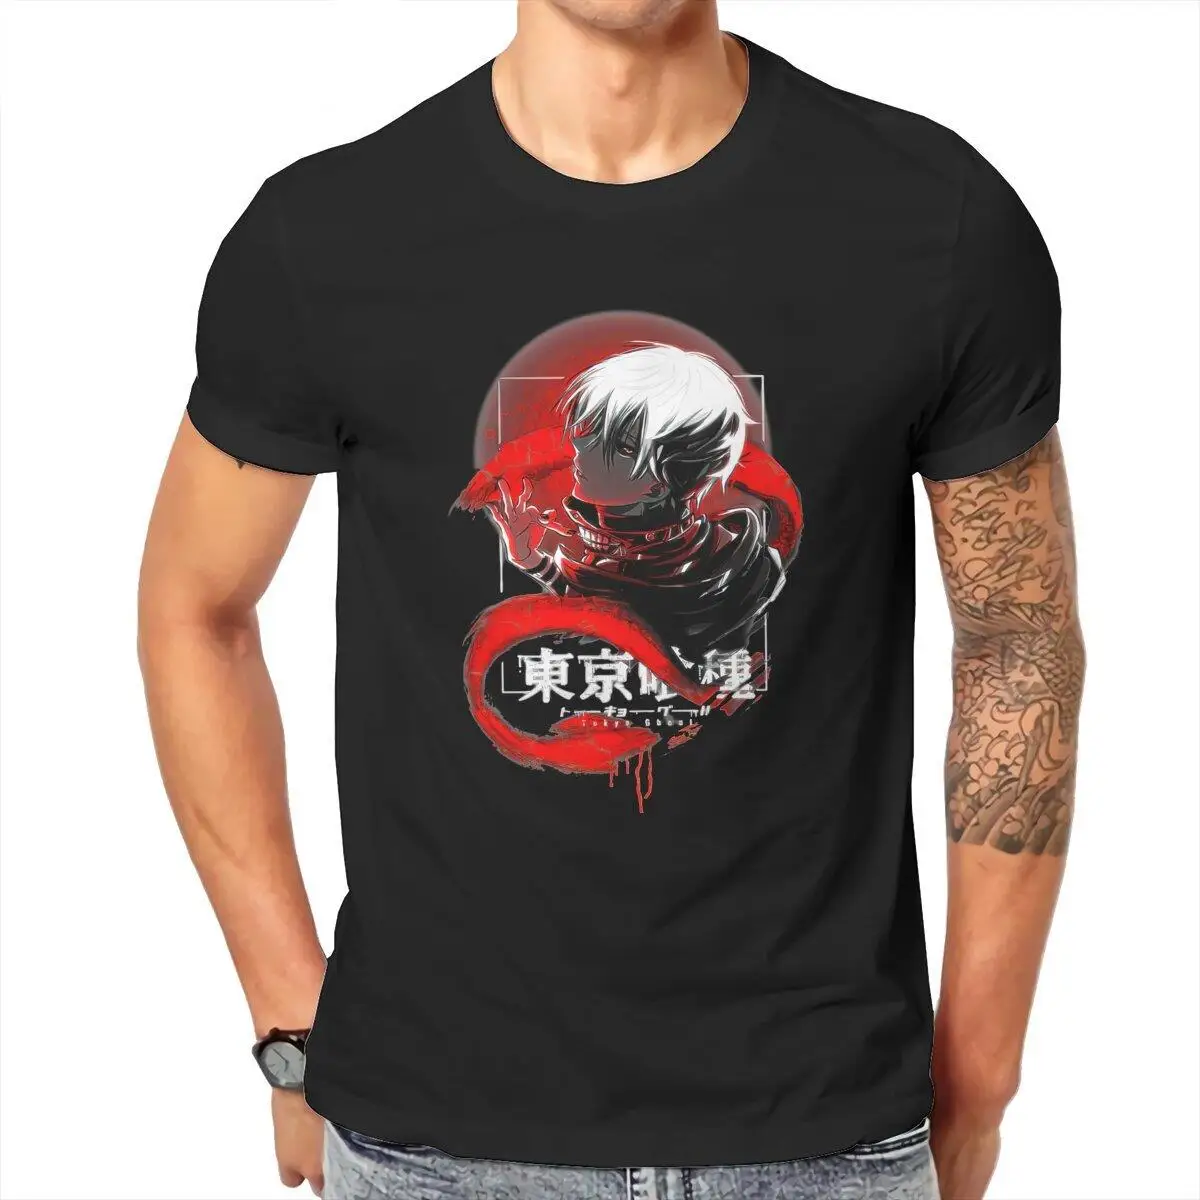 Tokyo Ghoul Anime  Men's T Shirts  Humor Tees Short Sleeve Round Neck T-Shirt Pure Cotton Gift Idea Clothing